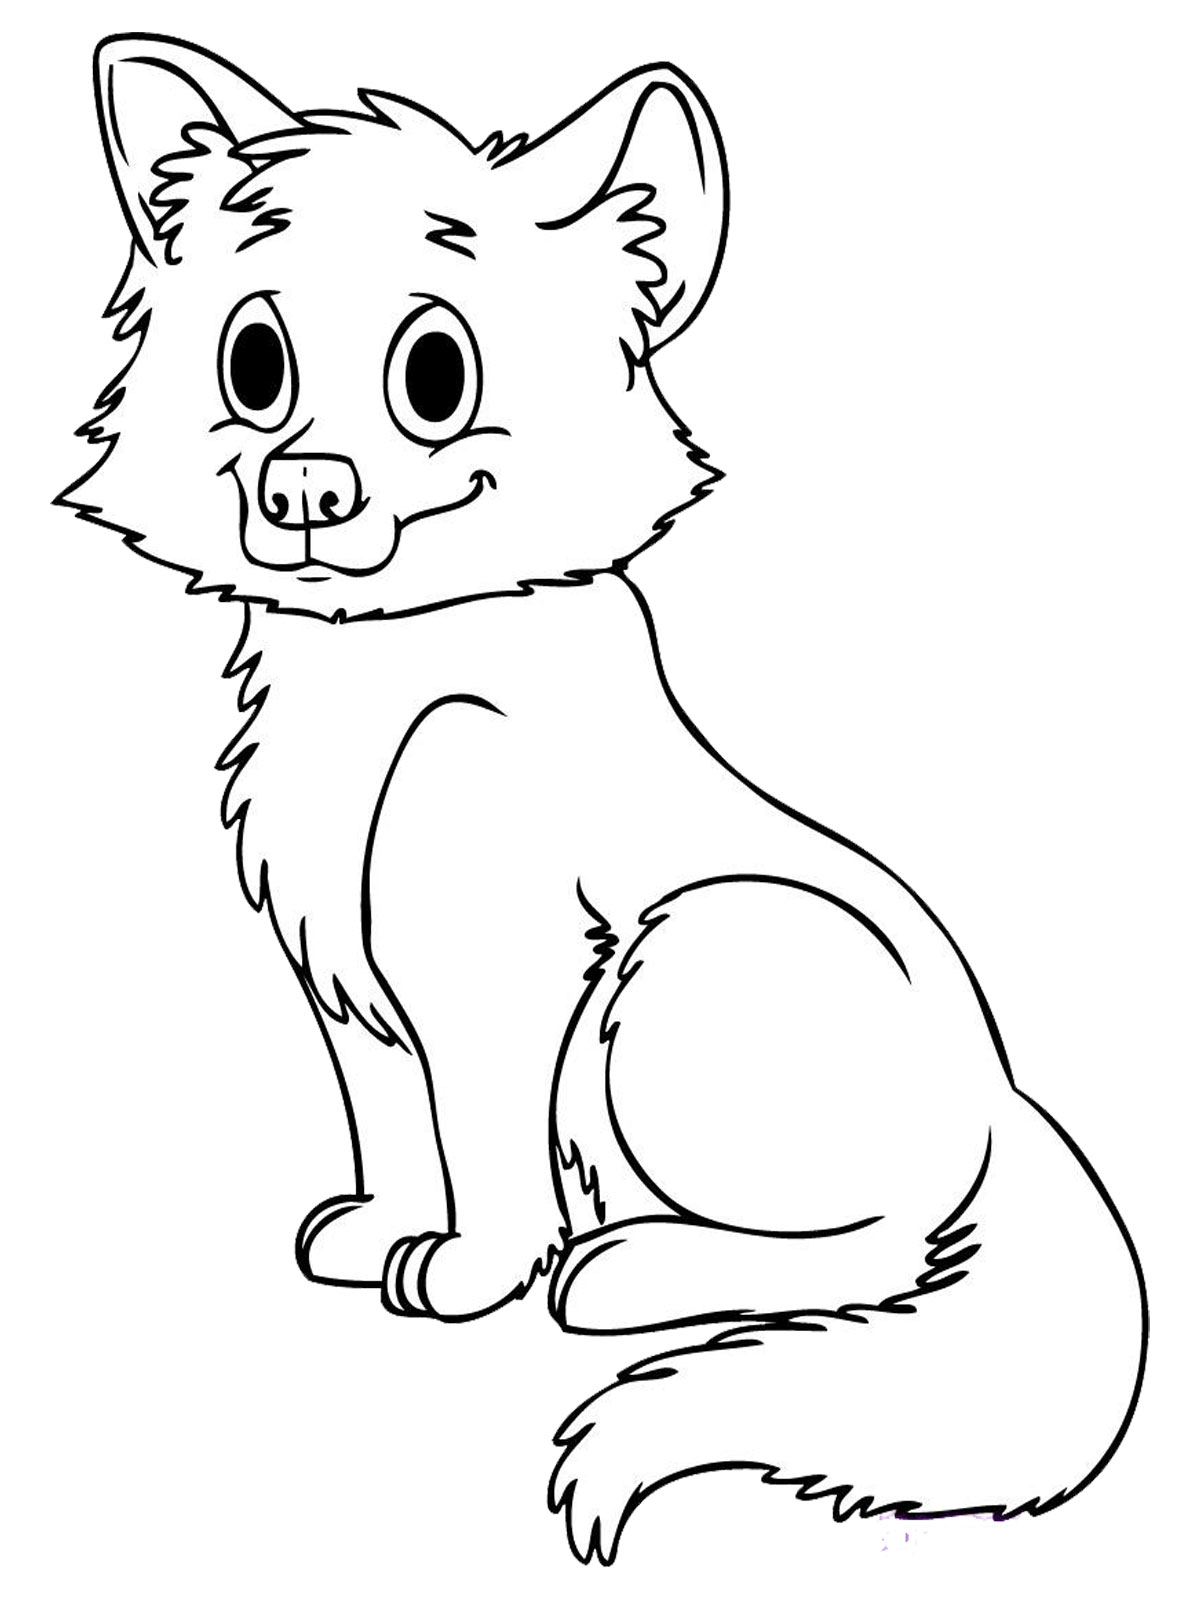 wolf black and white clipart